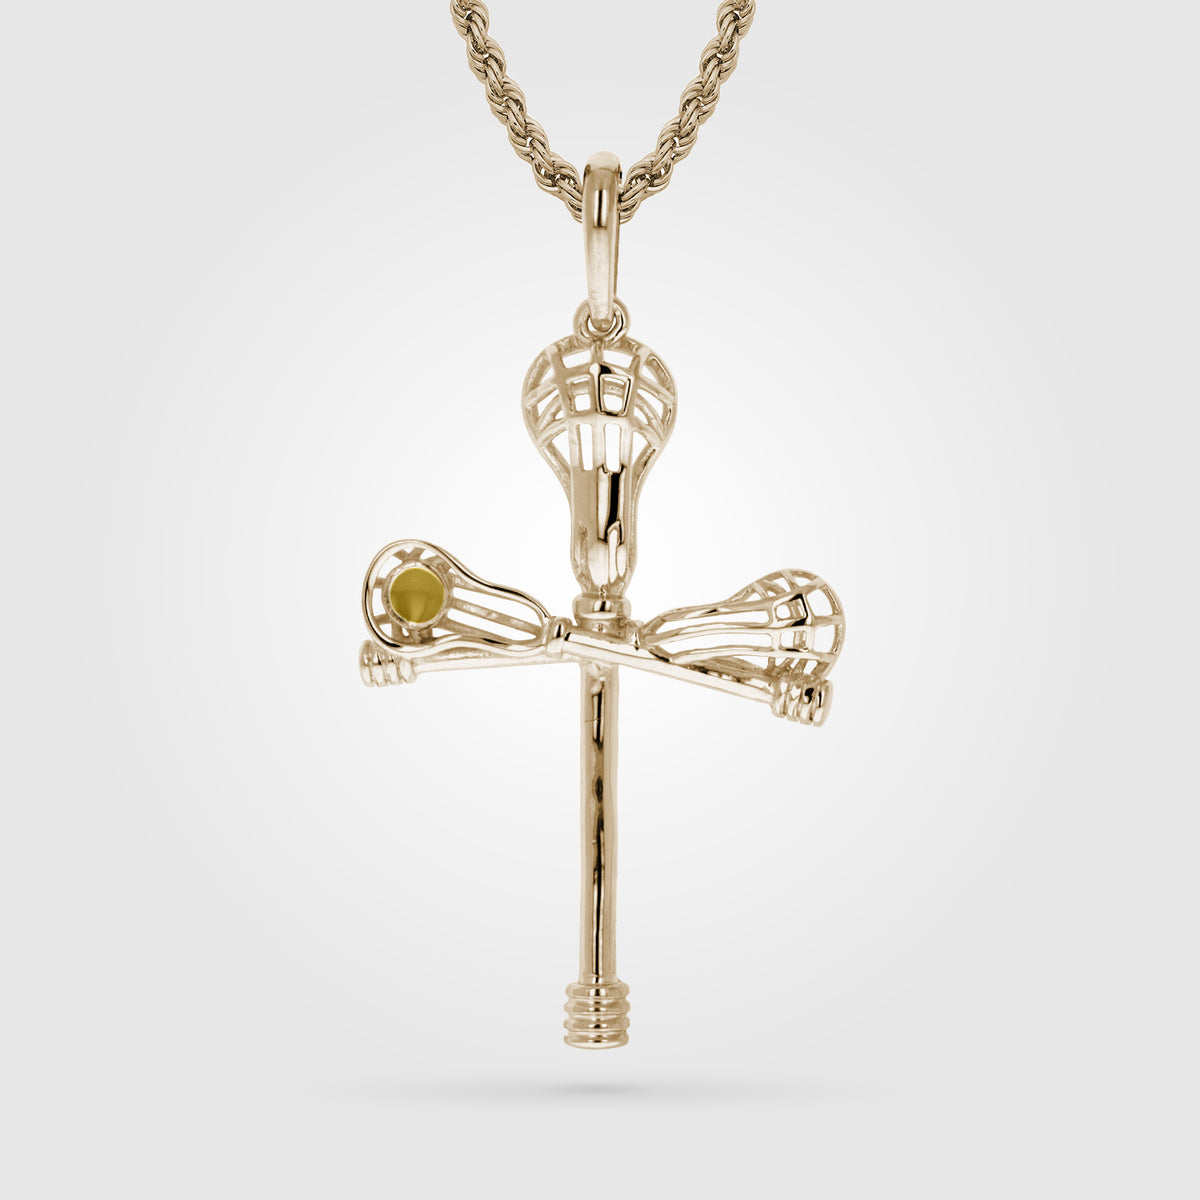 Gold Cross Check Lacrosse Necklace